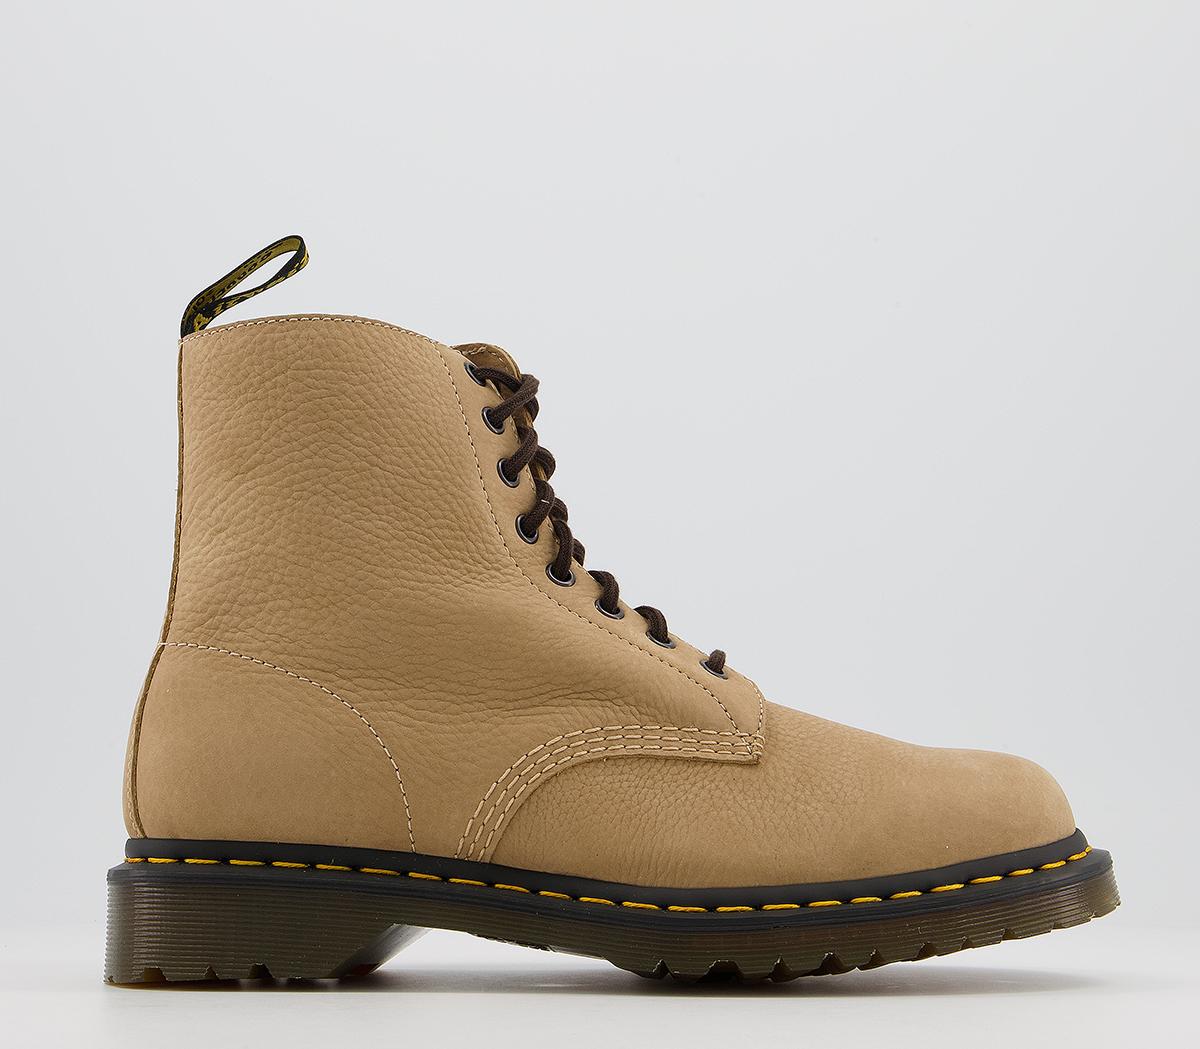 Dr. MartensDm 8 Eye Lace BootsSand Milled Nubuck